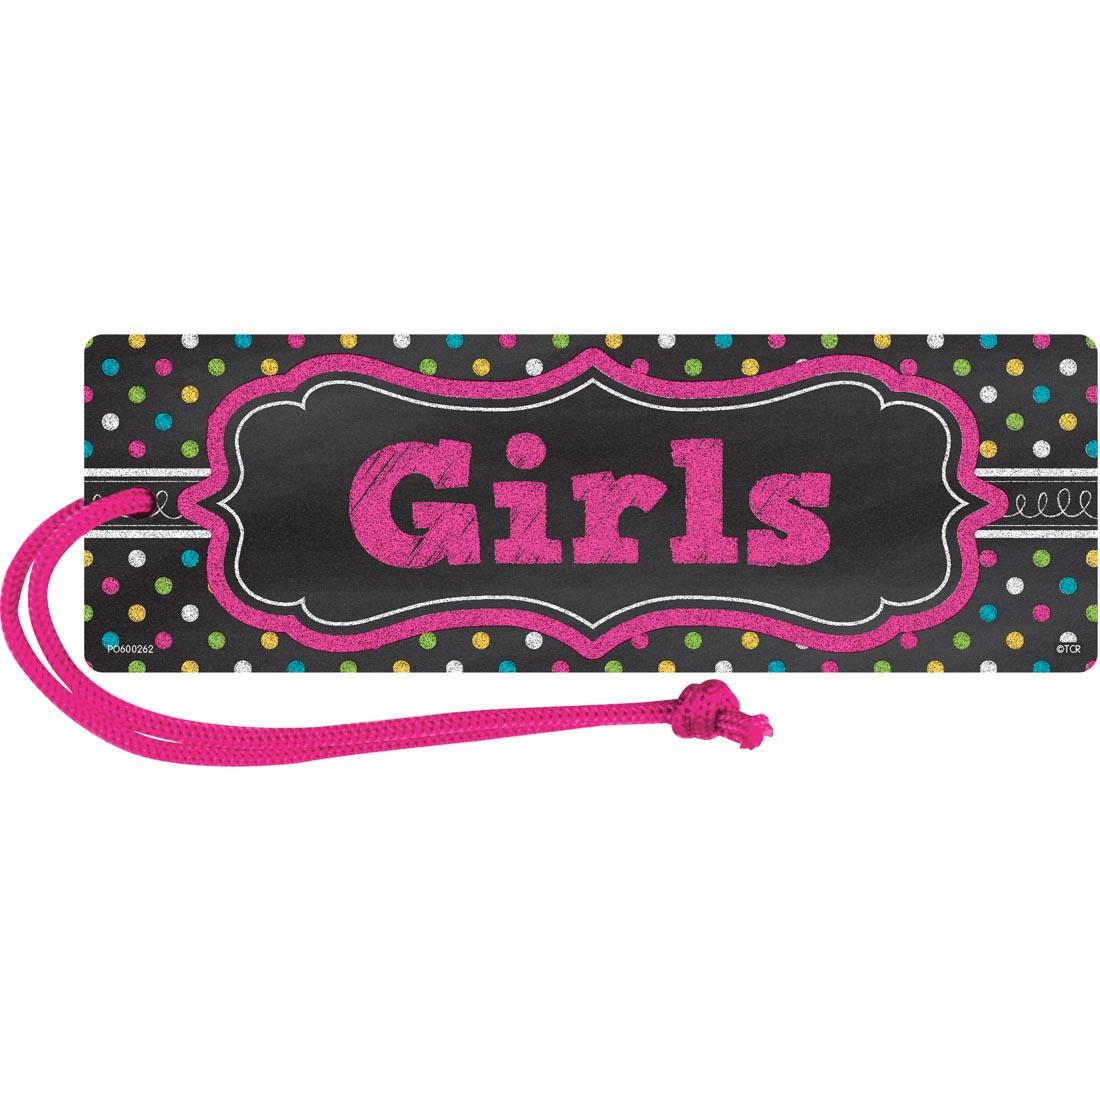 Magnetic Girls Pass from the Chalkboard Brights collection by Teacher Created Resources